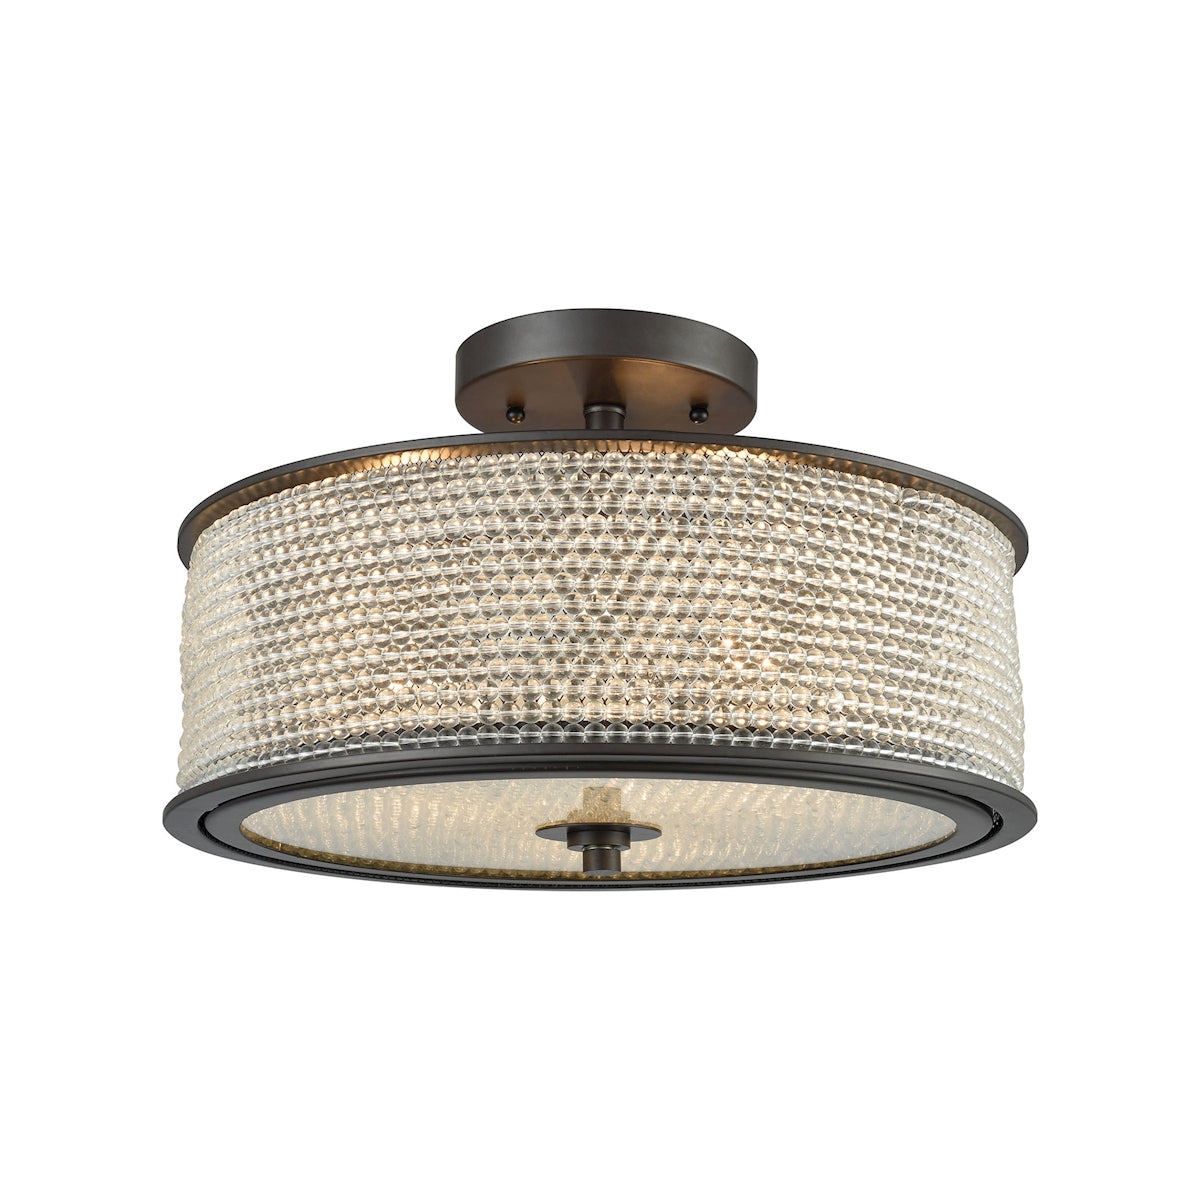 ELK Lighting 15970/3 Glass Beads 3-Light Semi Flush in Oil Rubbed Bronze with Clear Glass Balls Drum Shade